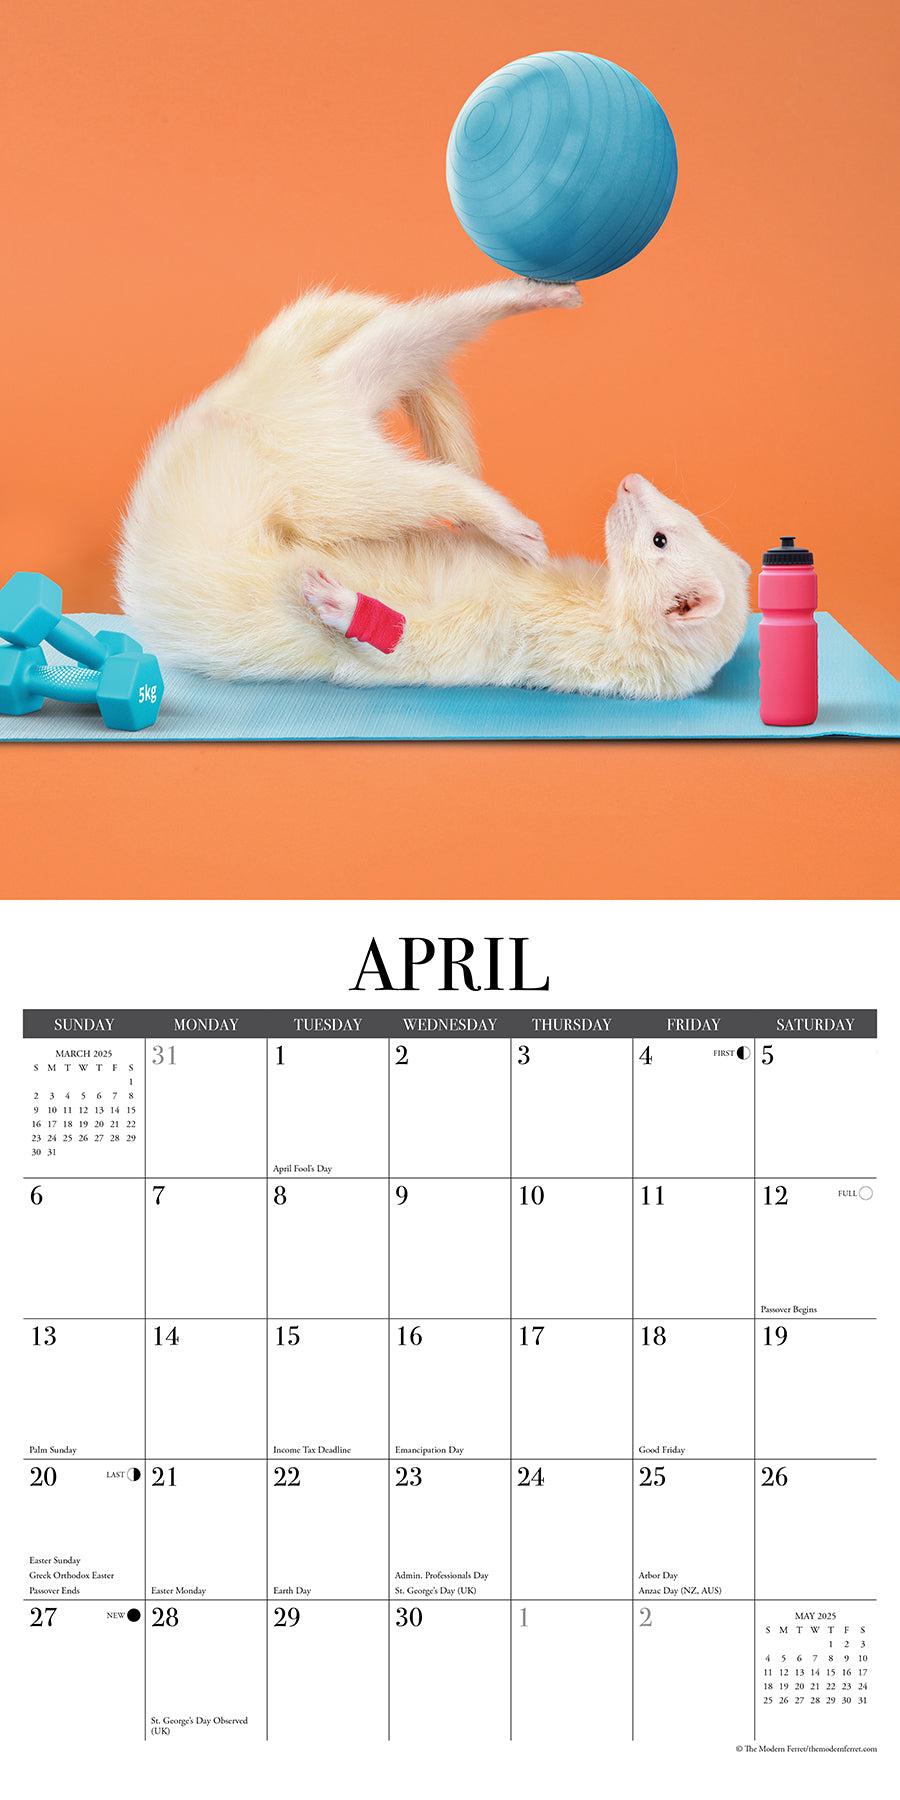 2025 Modern Ferret (The) - Square Wall Calendar (US Only)